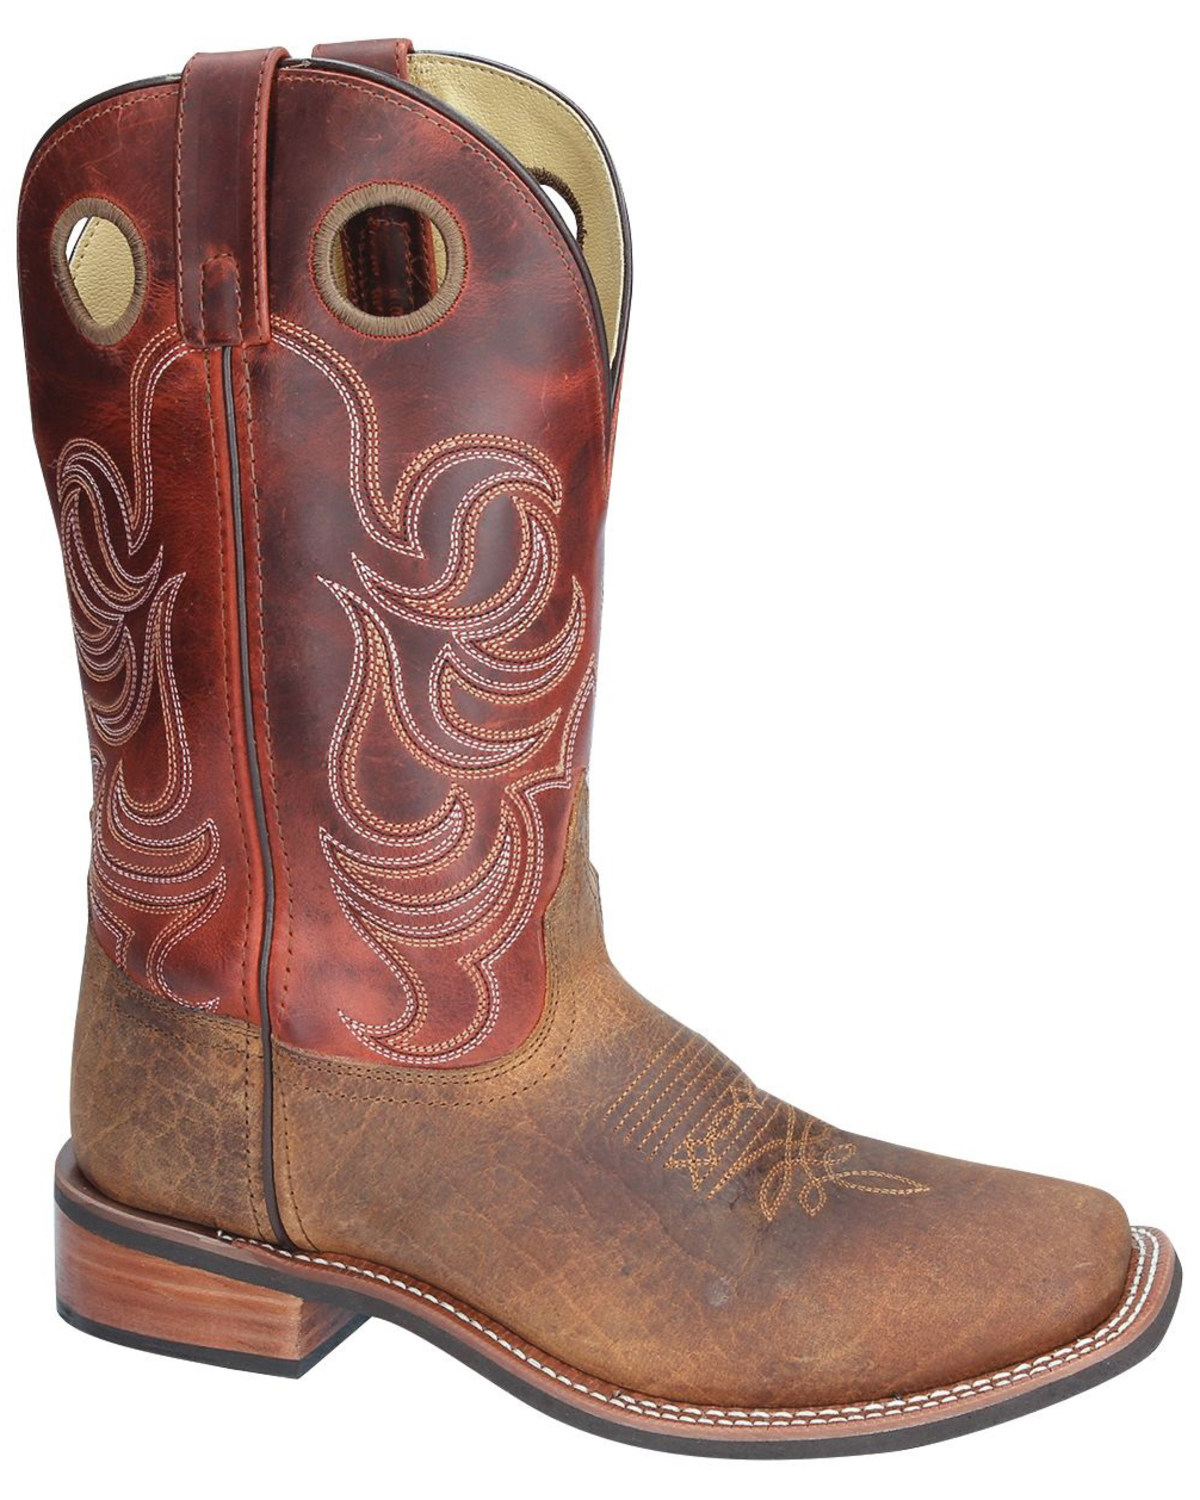 Smoky Mountain Timber Brown Western Boots - Square Toe